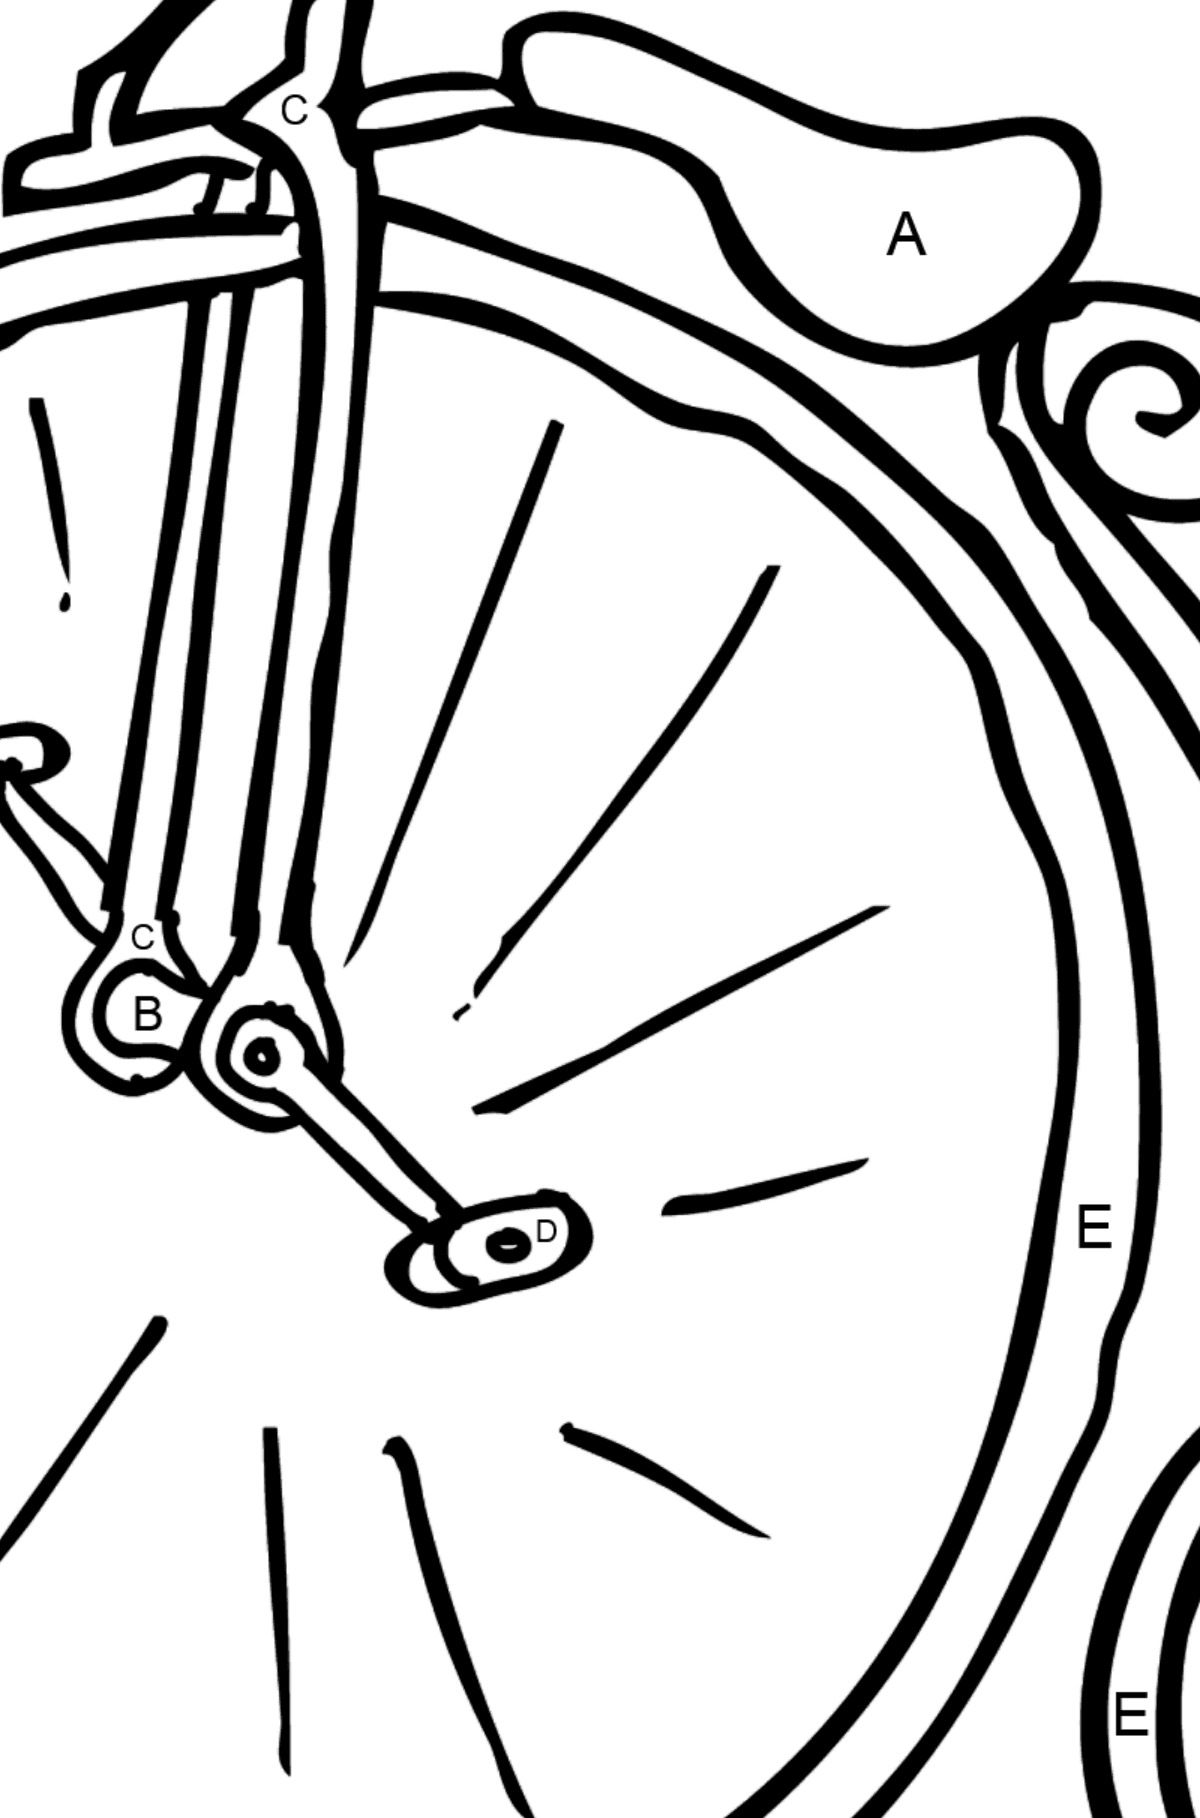 Coloring Page - A High-Wheel Cycle – Unicycle - Coloring by Letters for Kids